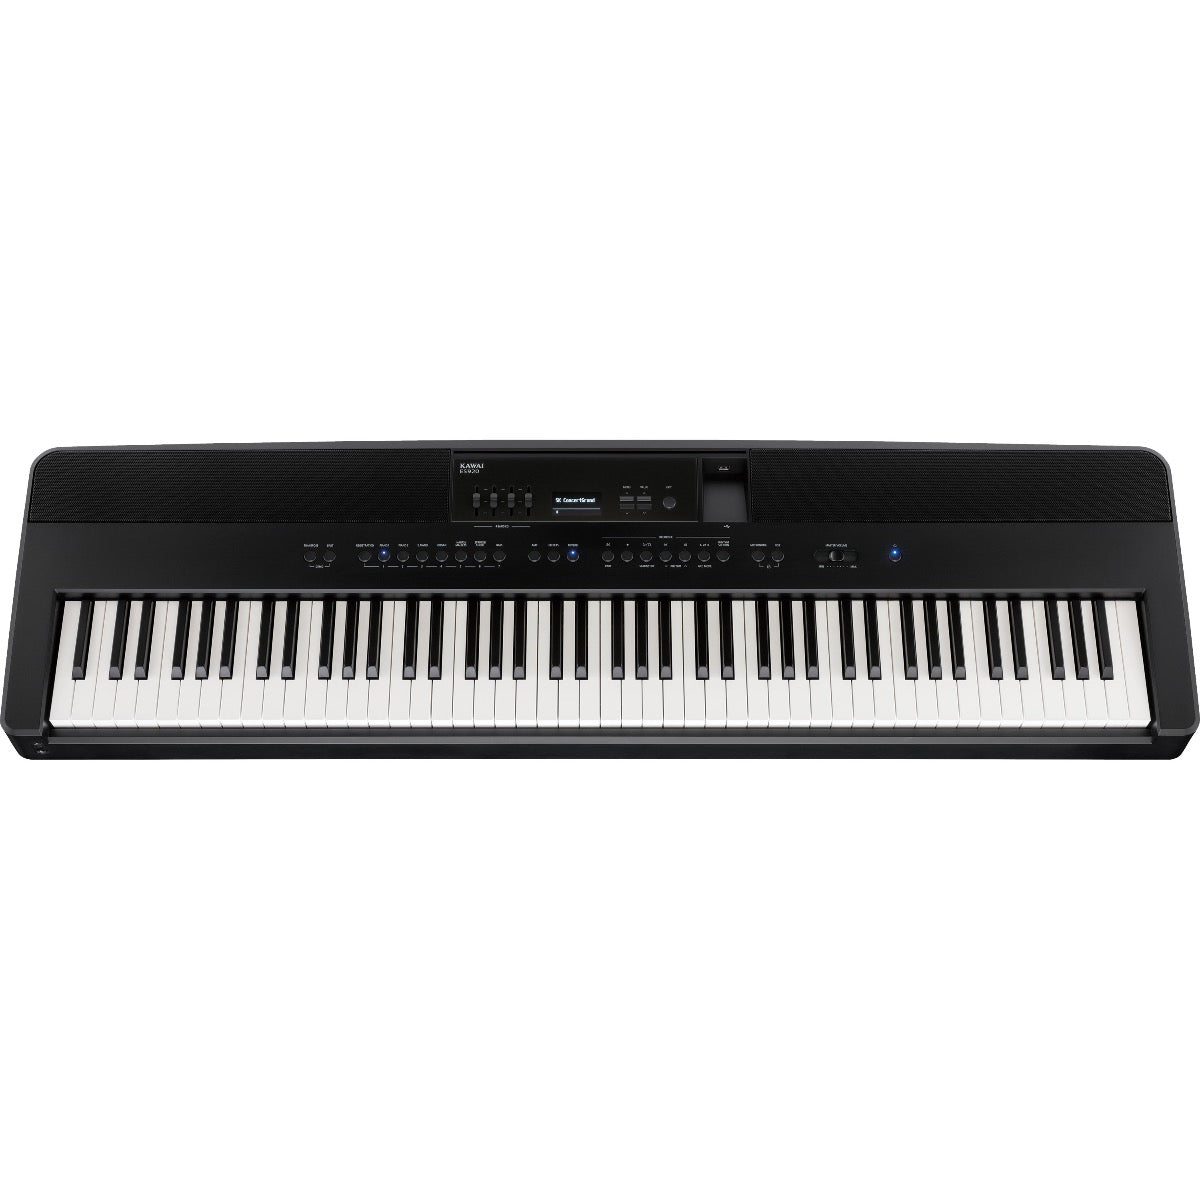 Perspective view of Kawai ES920 Portable Digital Piano - Black showing top and front